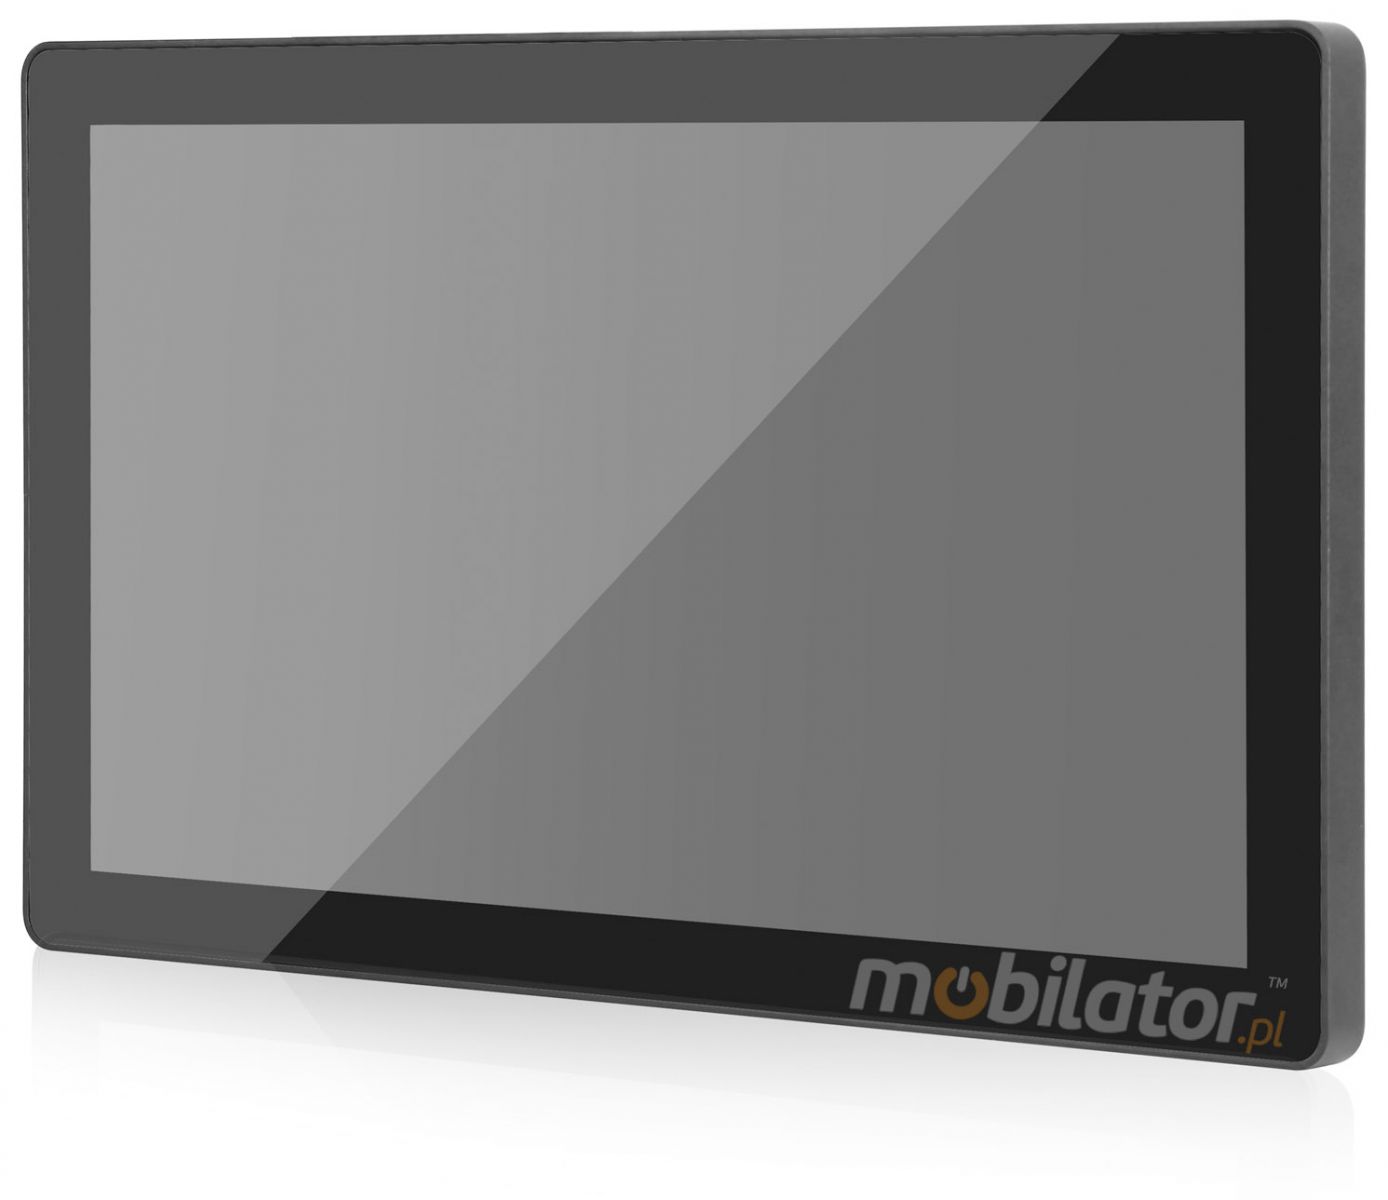 Mobilator Flat Design PCAP Fanless Touch PC, LED panel, 10 points touch screen, built-in WIFI, 12V DC input